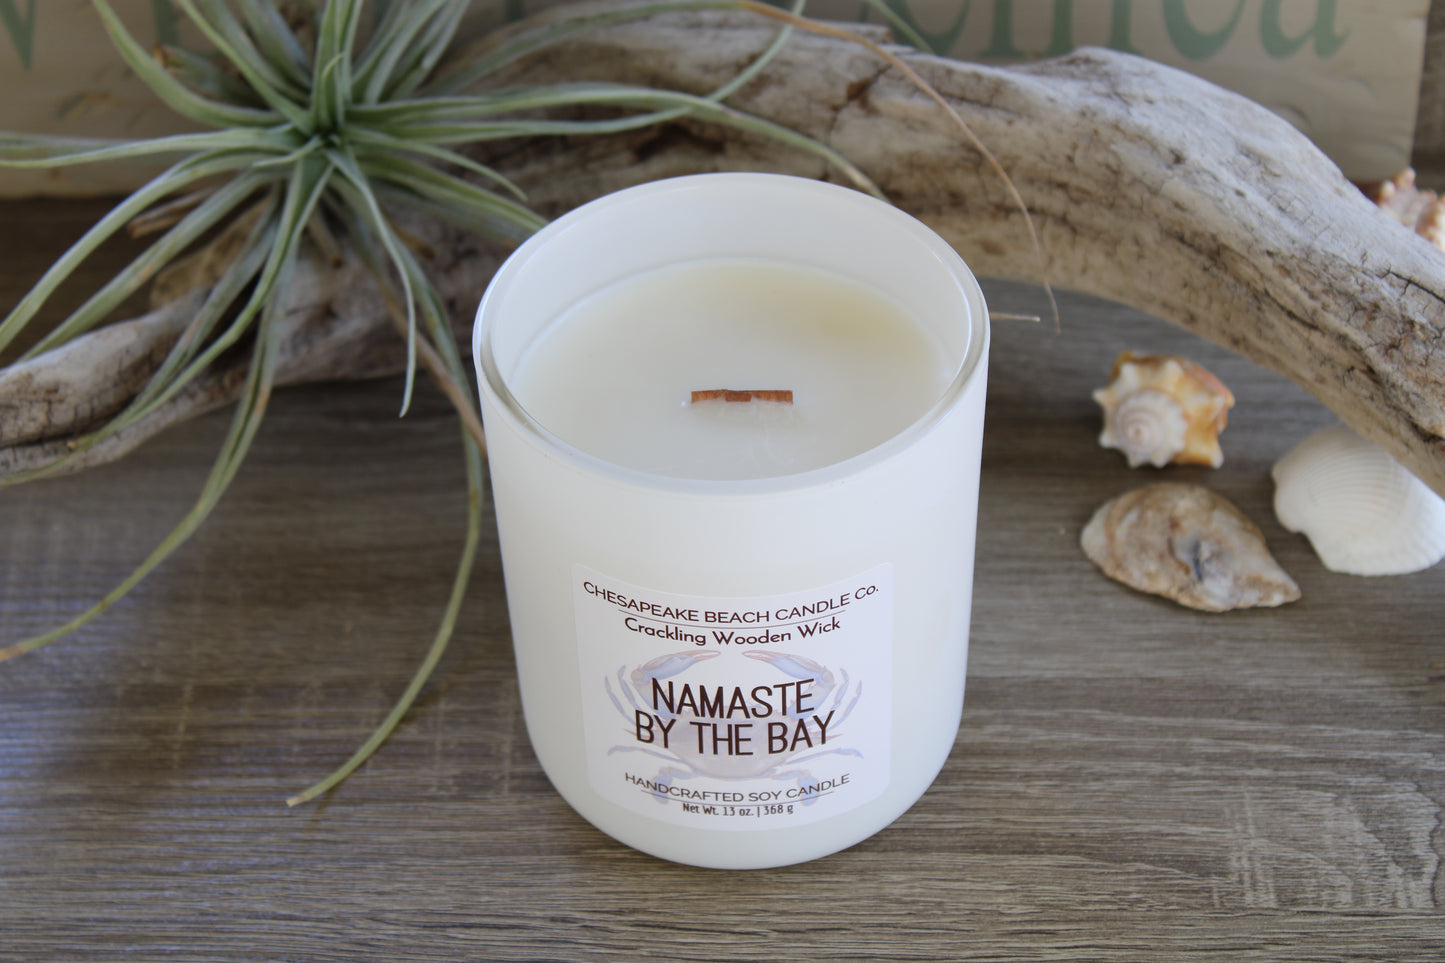 Namaste by the Bay Wooden Wick Candle (13 oz)